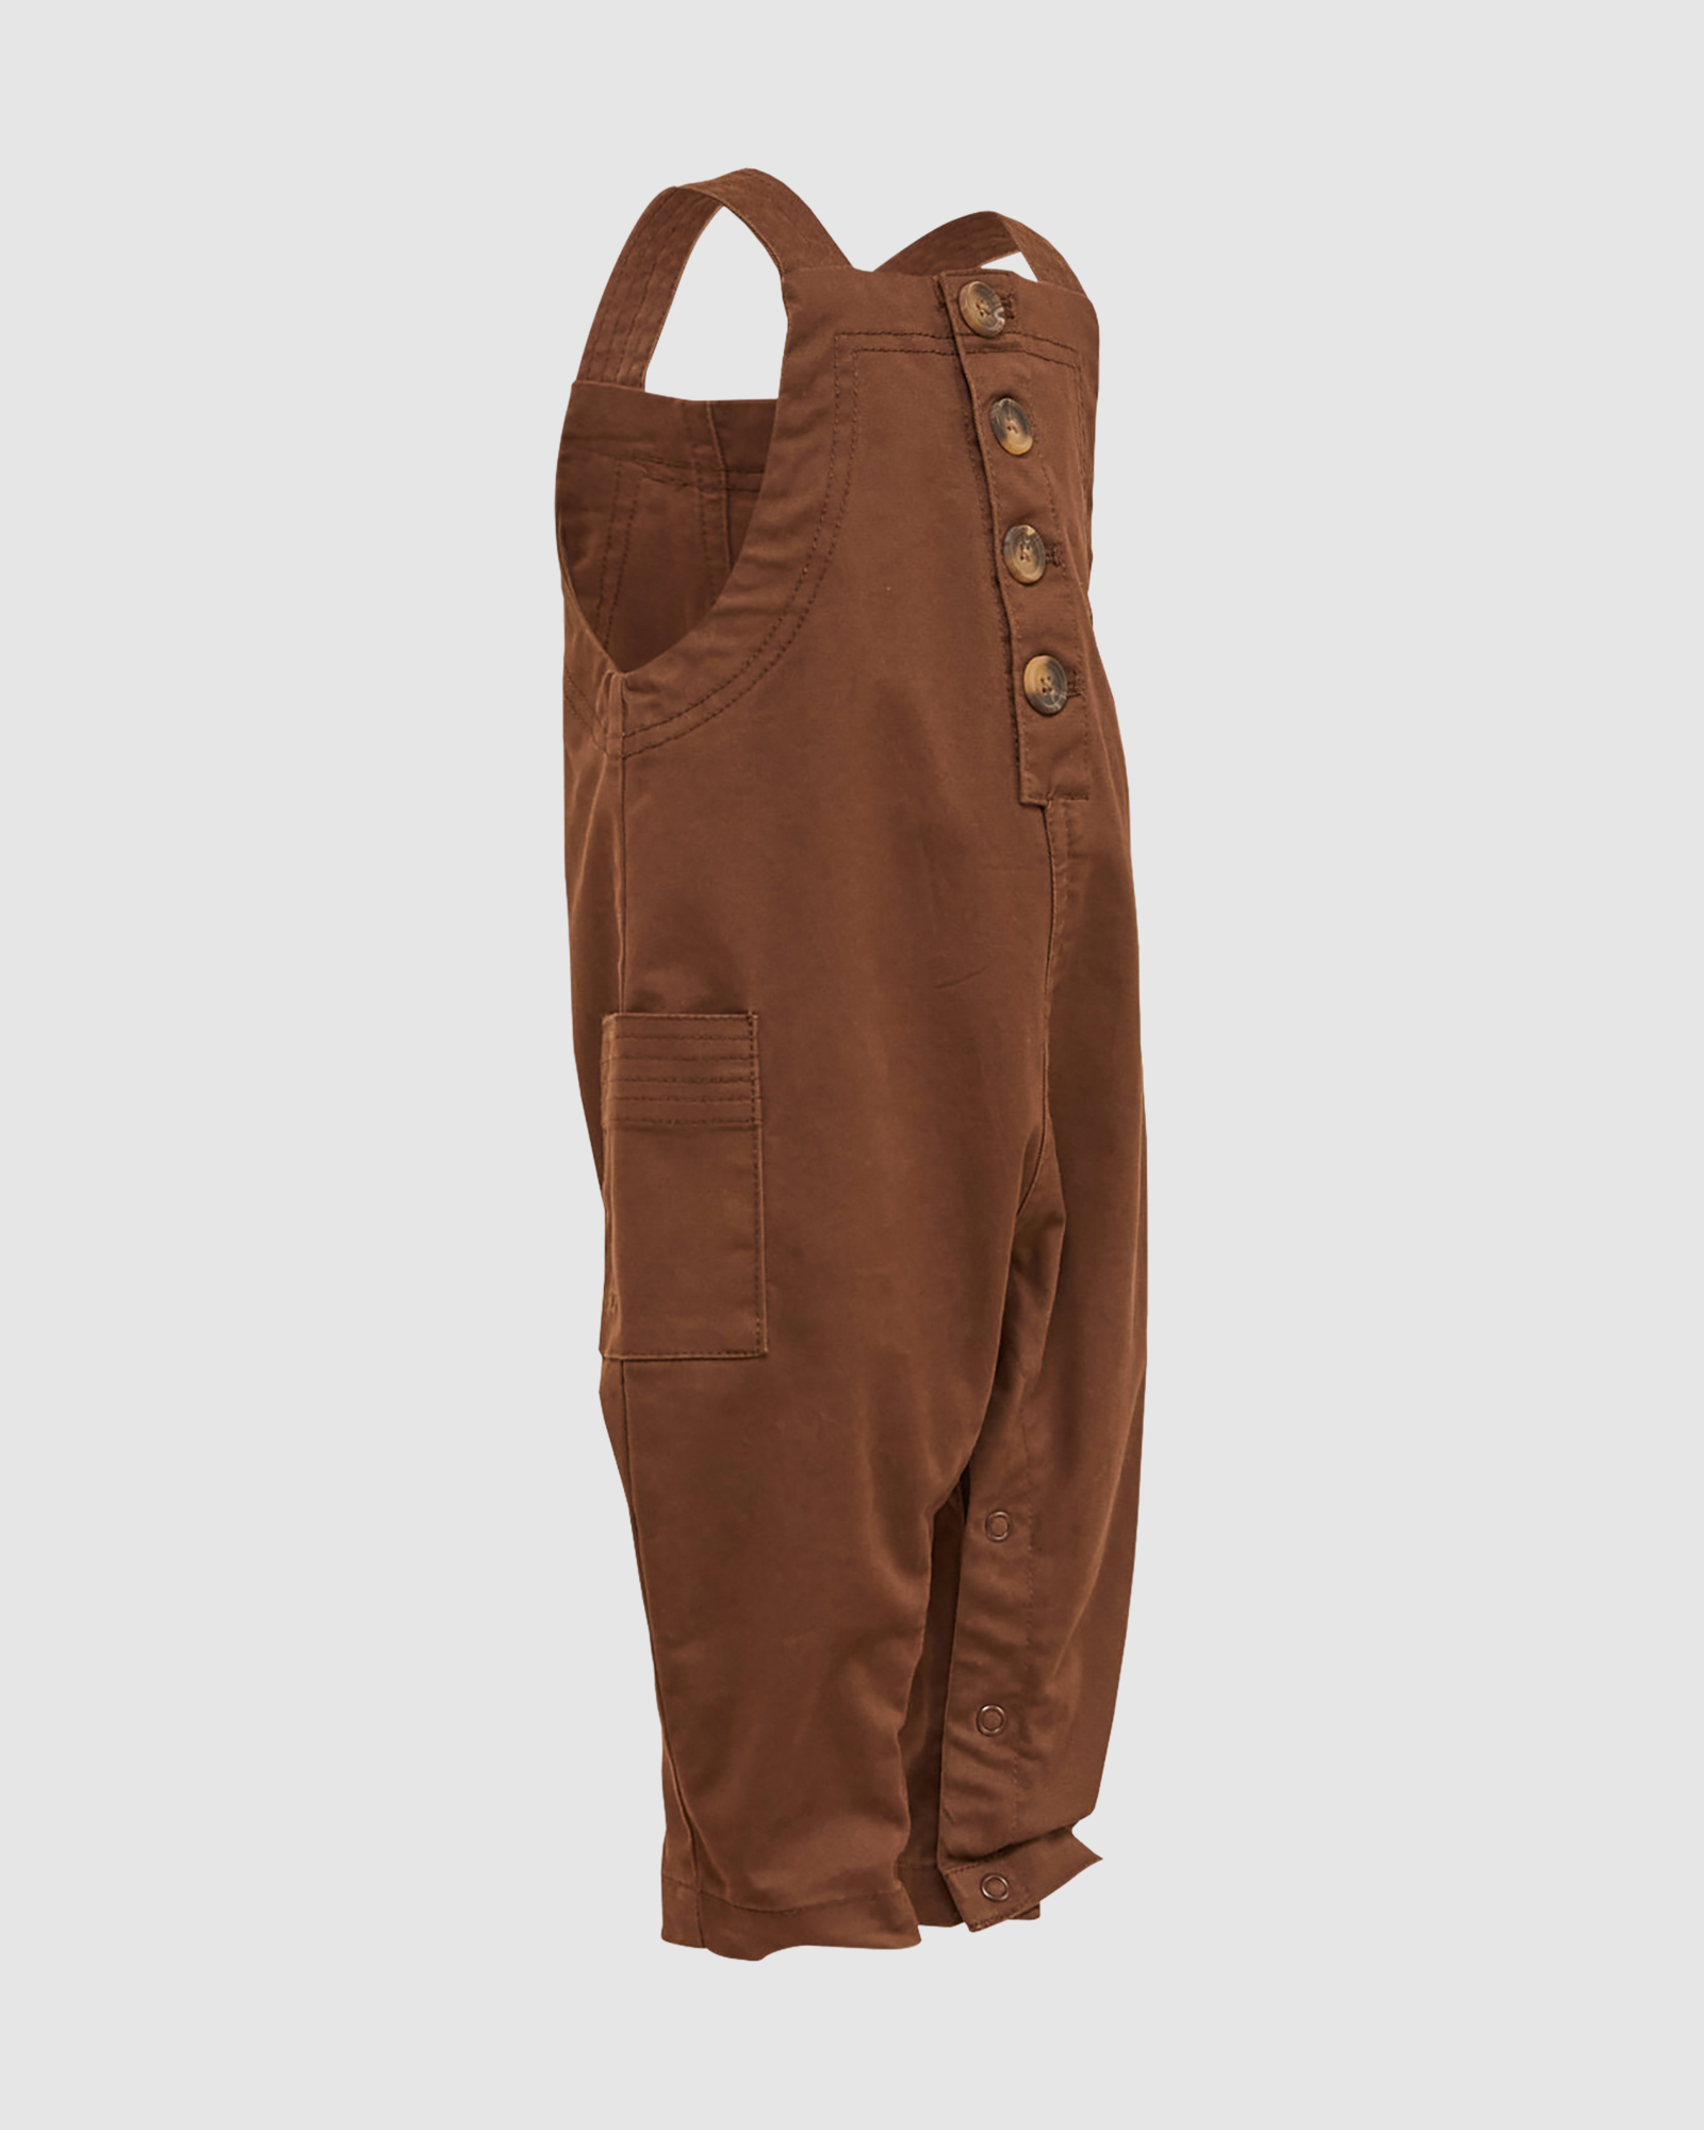 Dylan Stretch Baby Dungaree in CHESTNUT